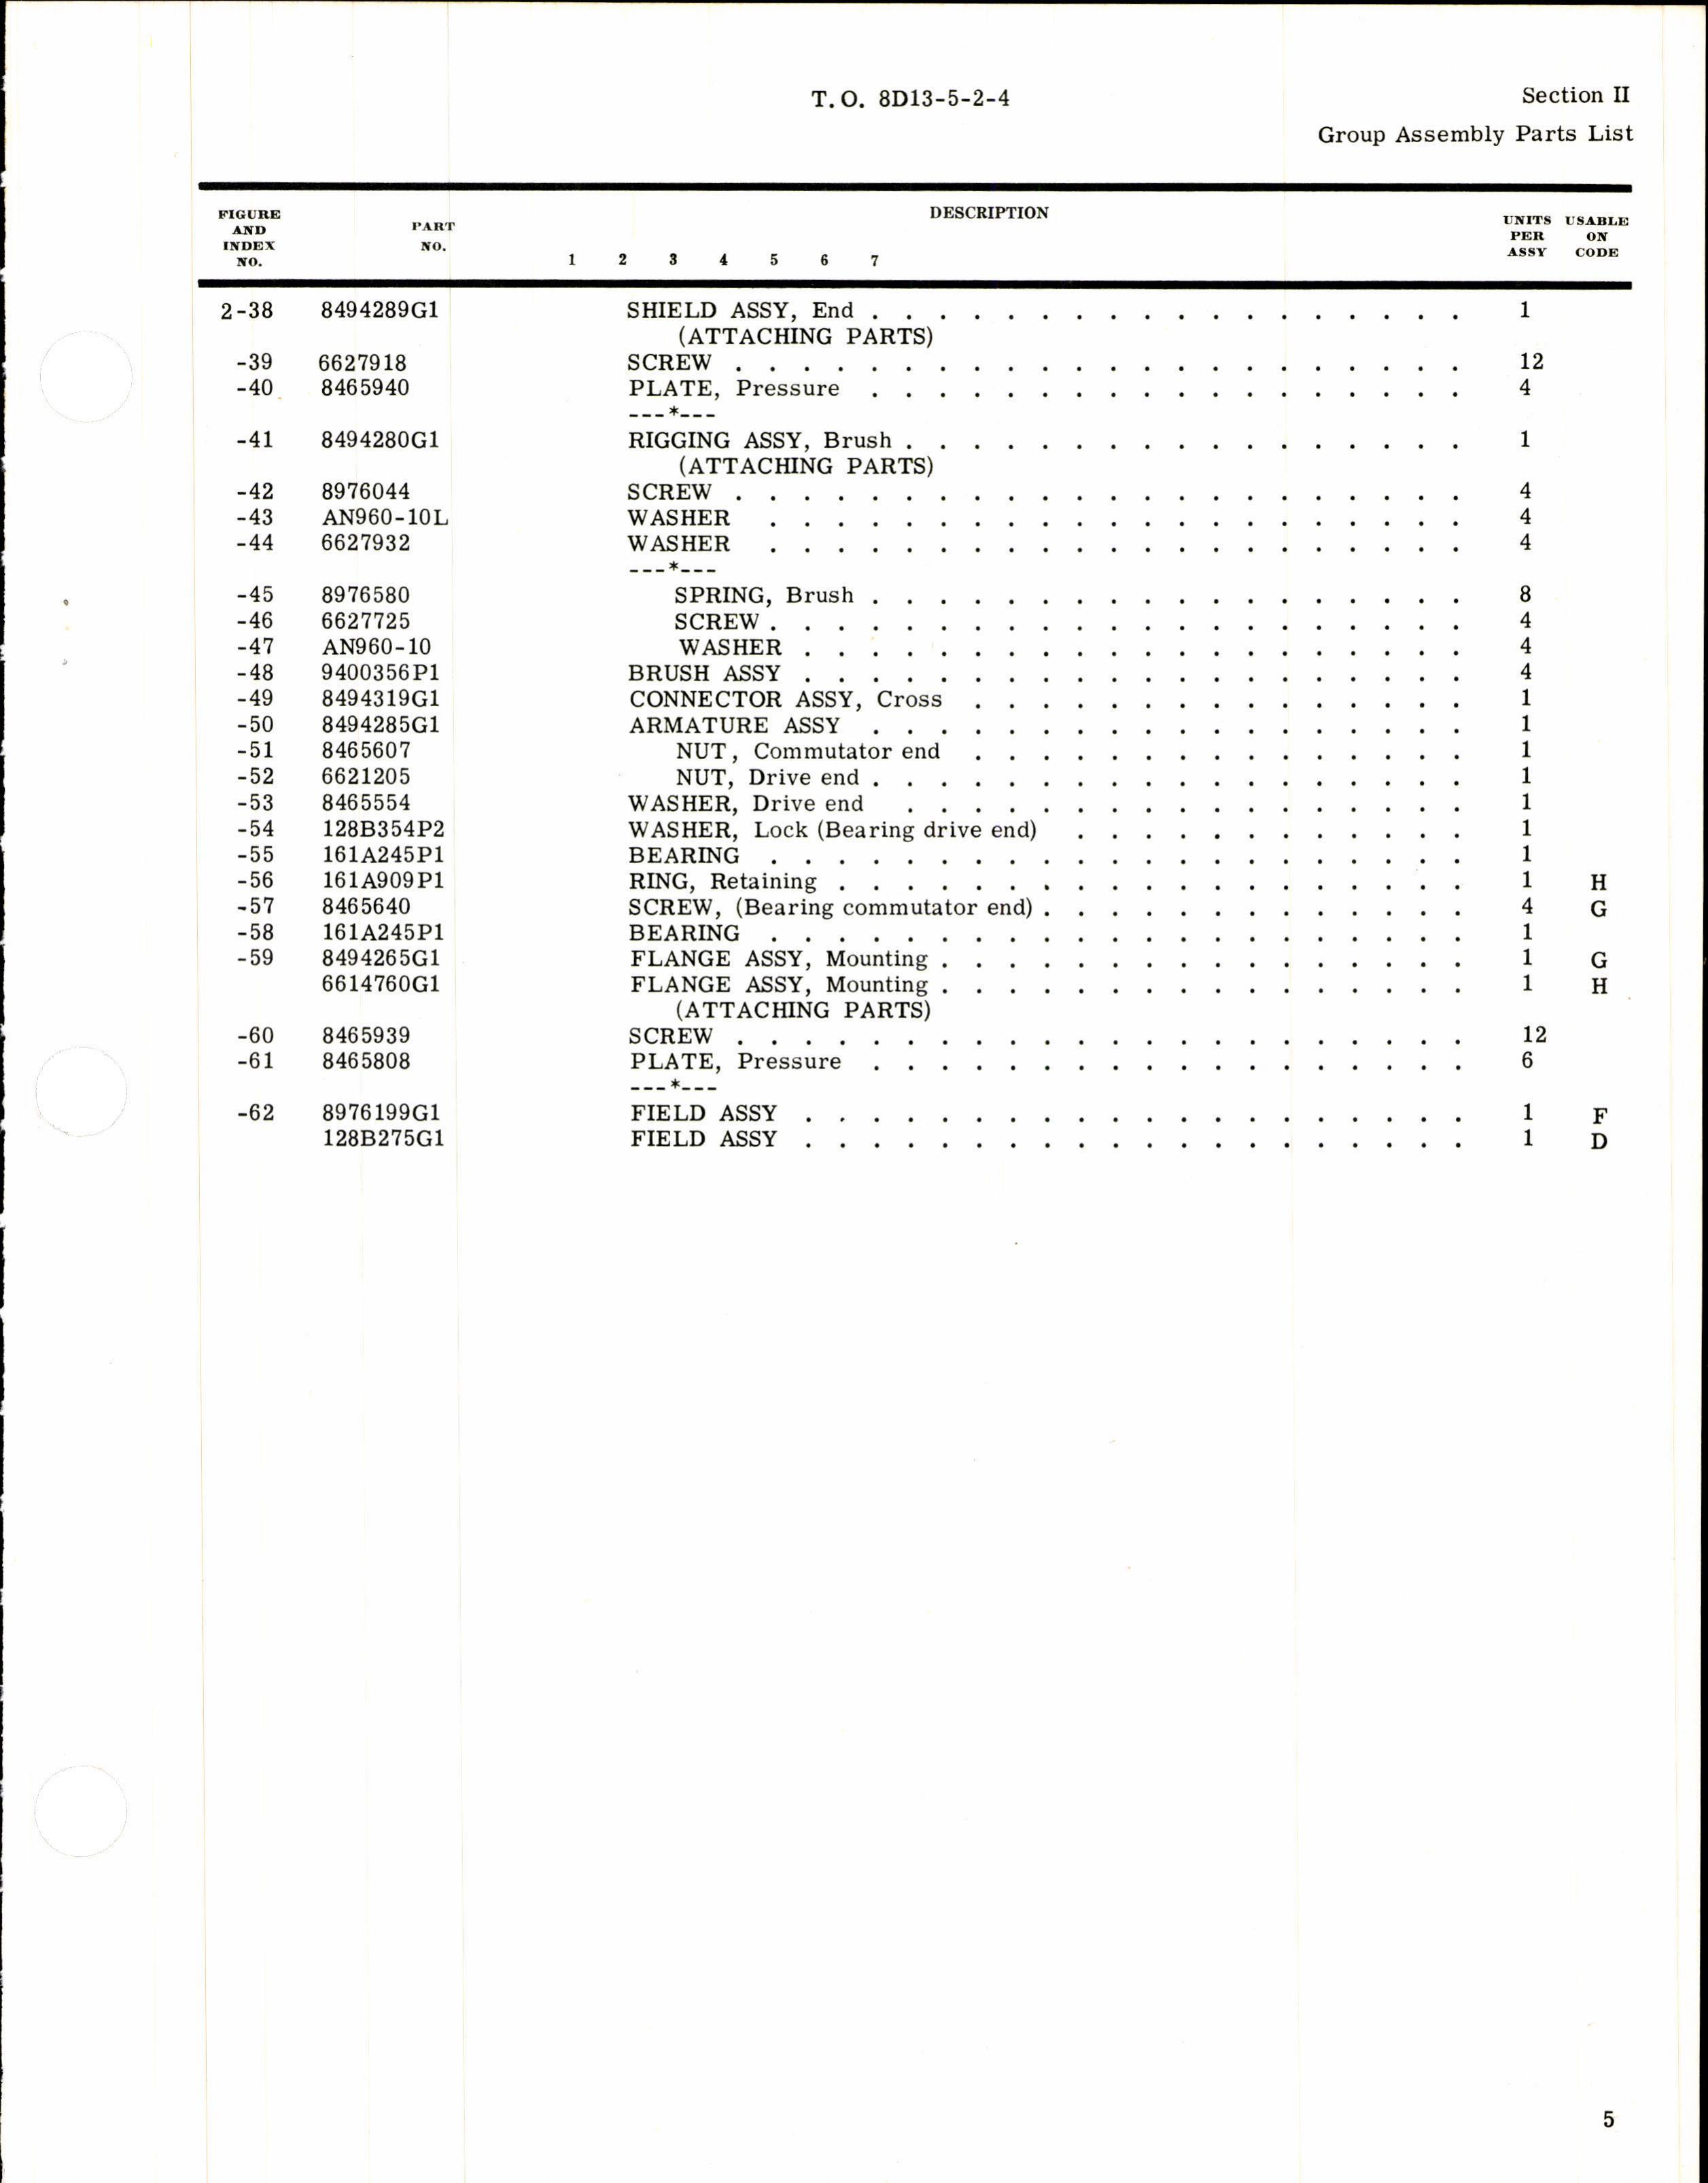 Sample page 5 from AirCorps Library document: Illustrated Parts Breakdown for GE Aircraft DC Starter Generator